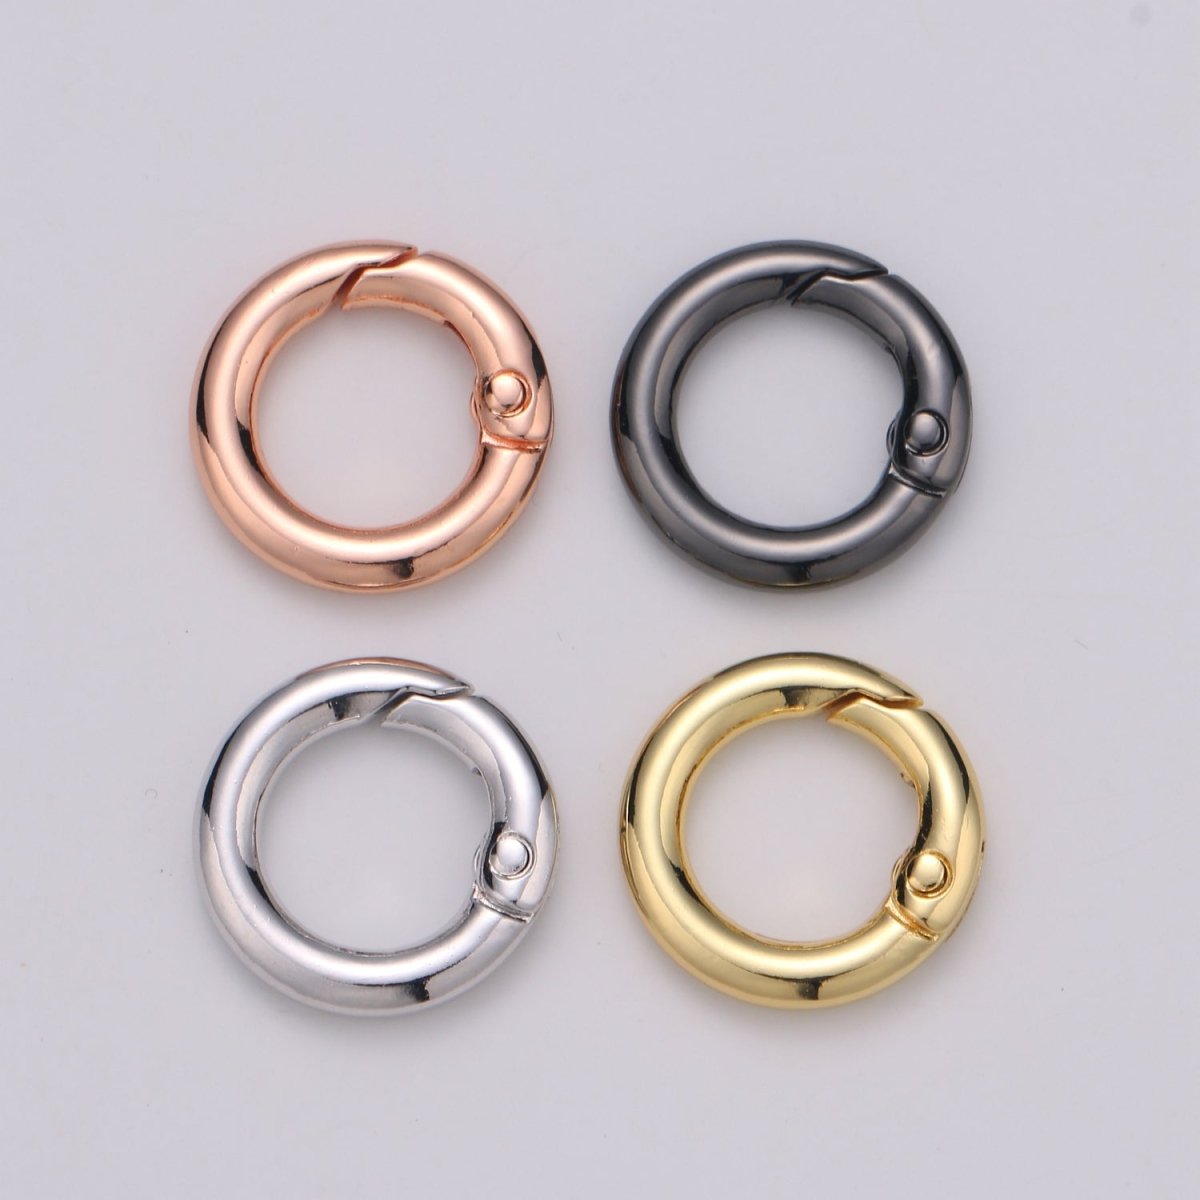 Chunky Gold Spring Gate Ring, Push Gate ring, 20mm Round Ring, Charm Holder 24K Gold Filled Clasp for Link Chain Connector L-032~L035 L084 L085 - DLUXCA